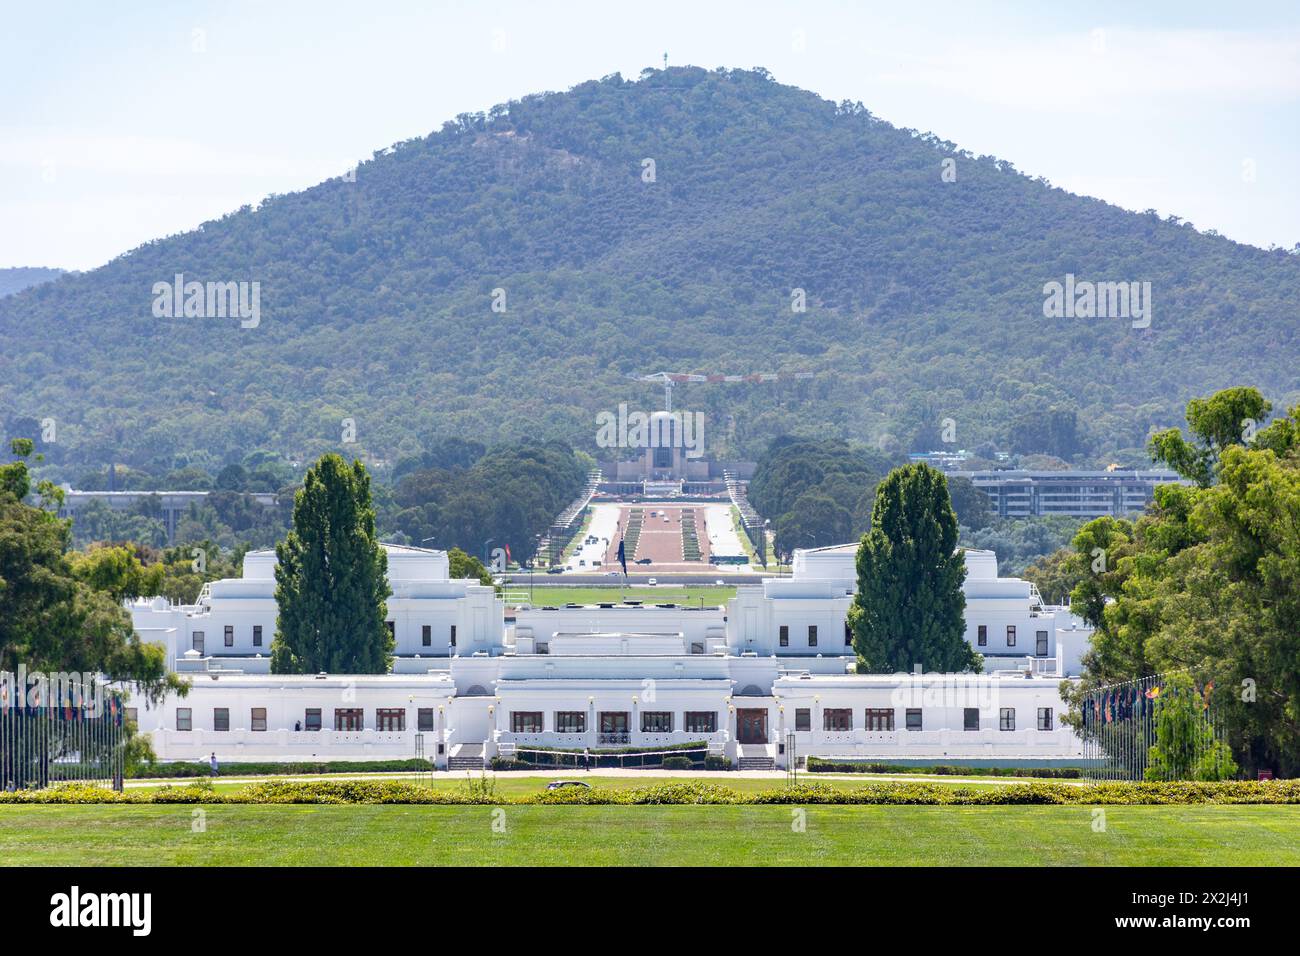 Old Parliament House und Red Hill von Capital Hill, King George Terrace, Canberra, Australian Capital Territory, Australien Stockfoto